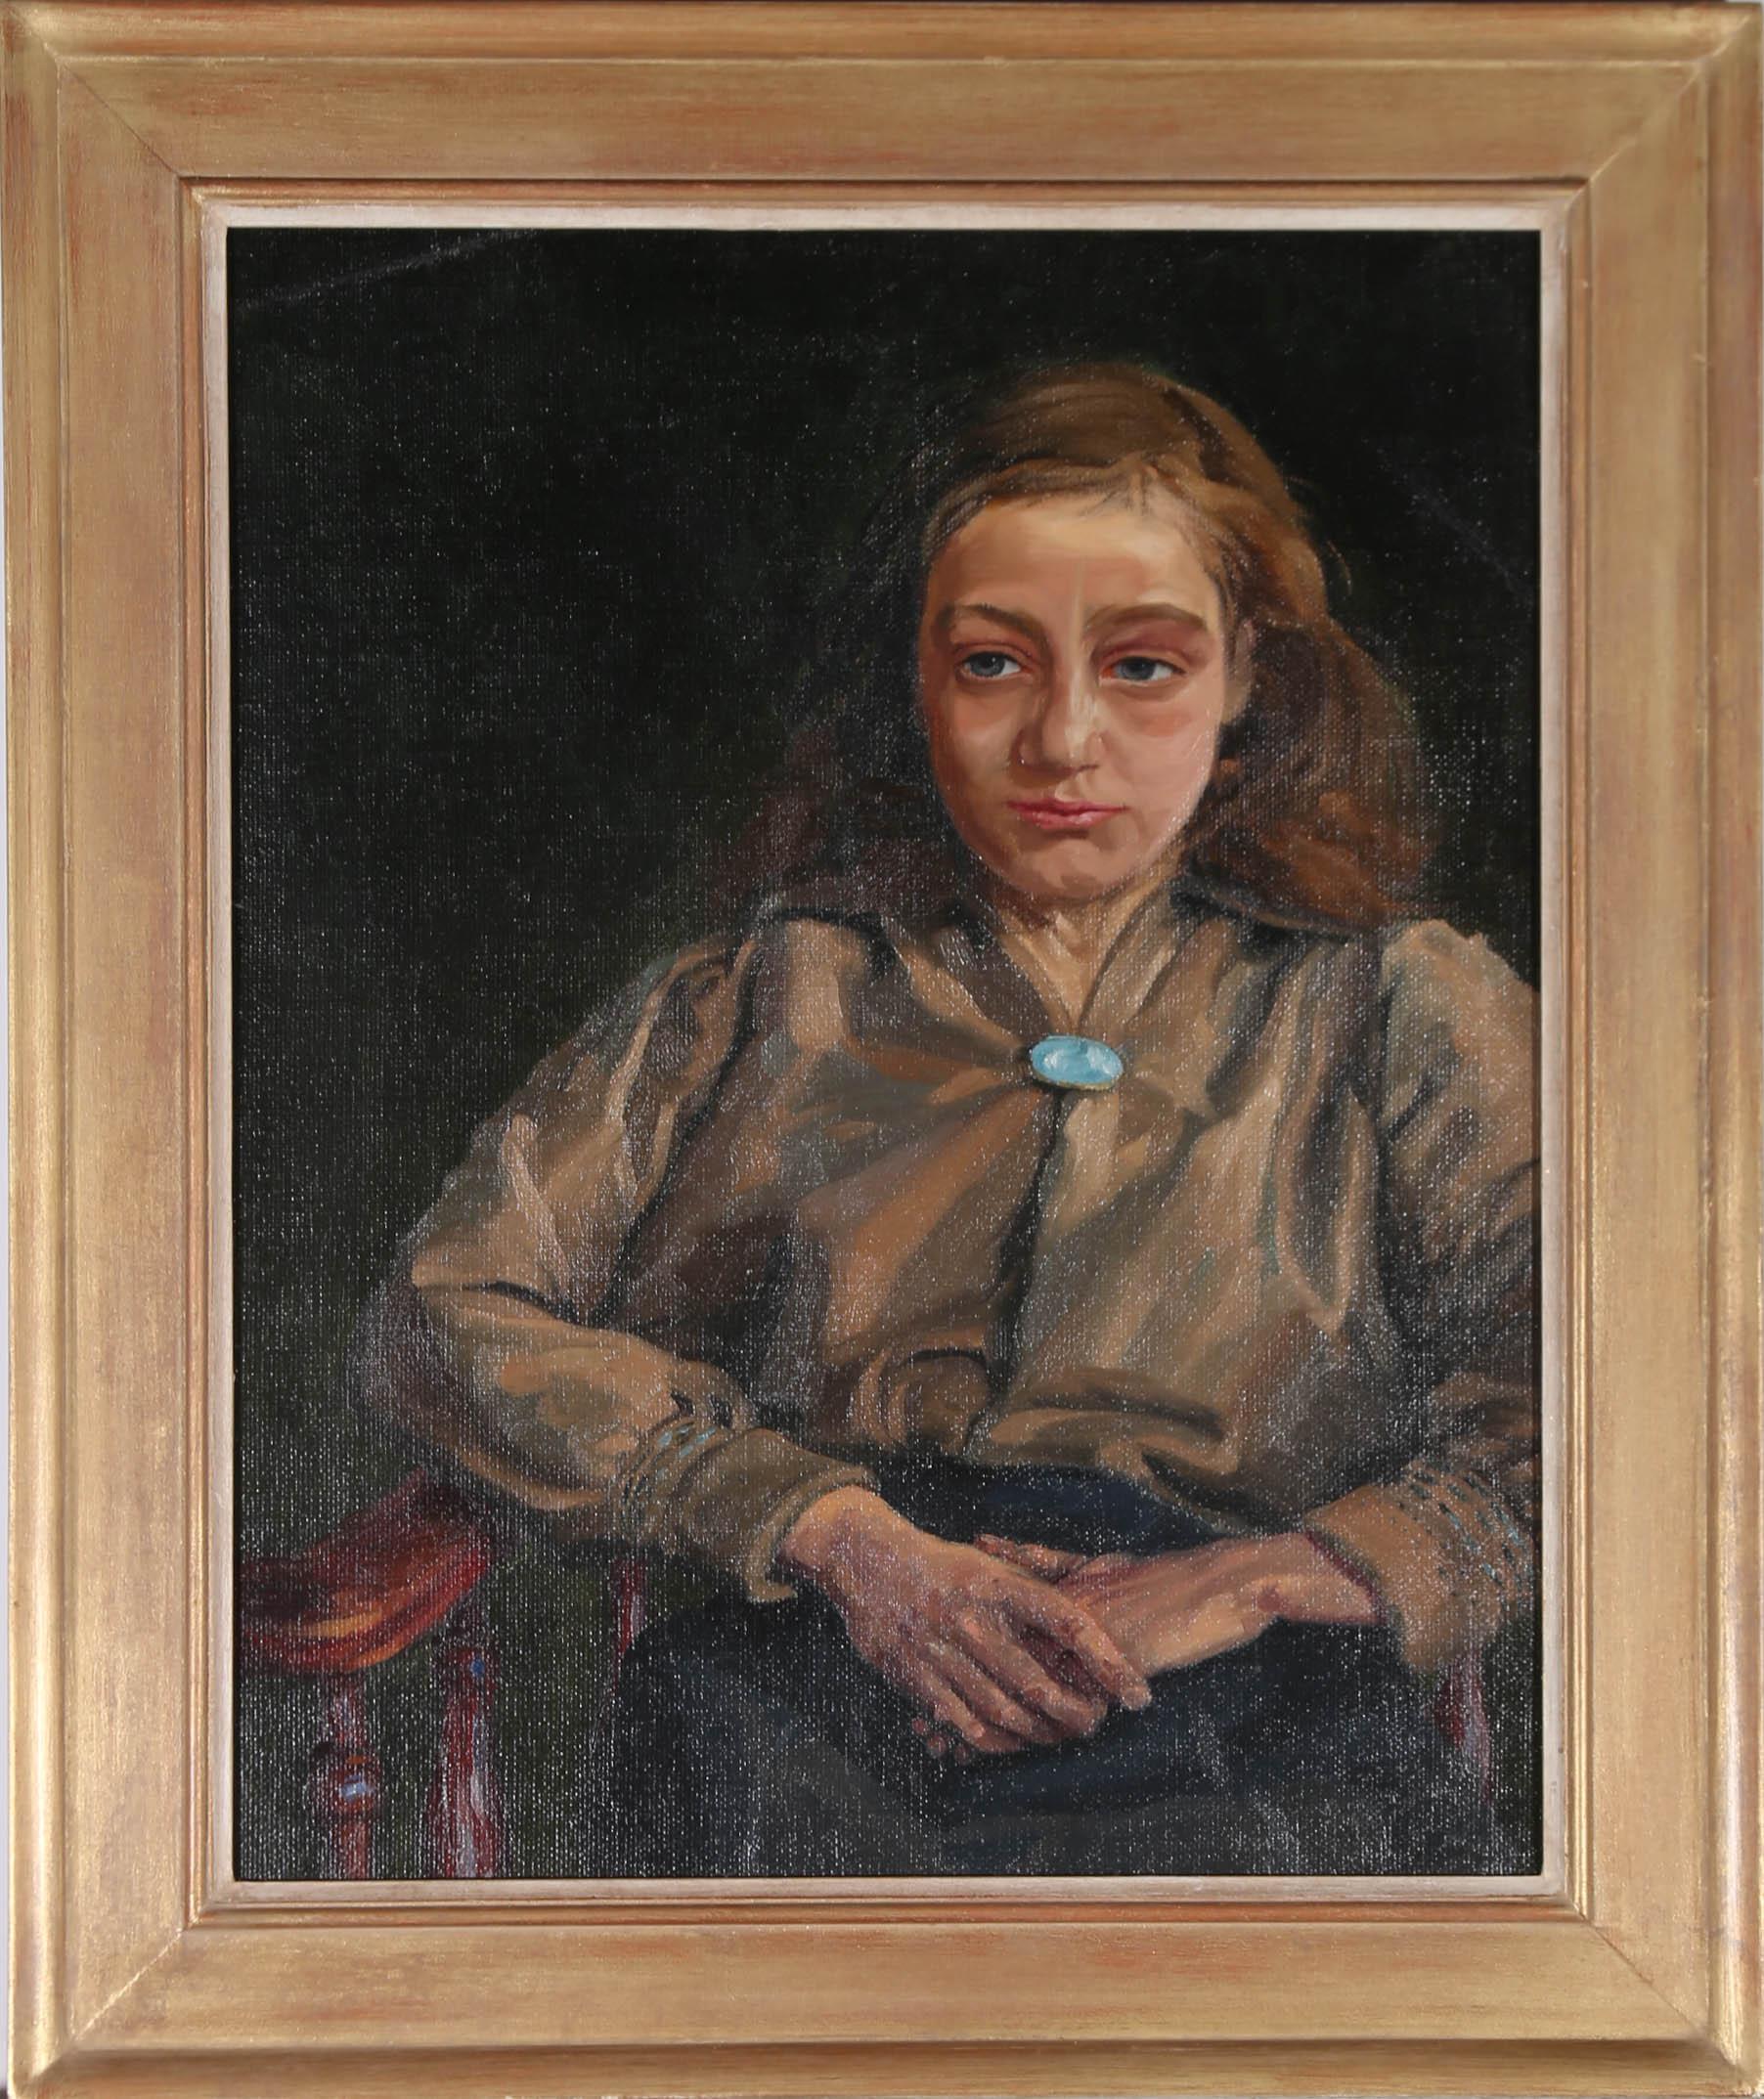 Unknown Portrait Painting - 20th Century Oil - Tired Girl